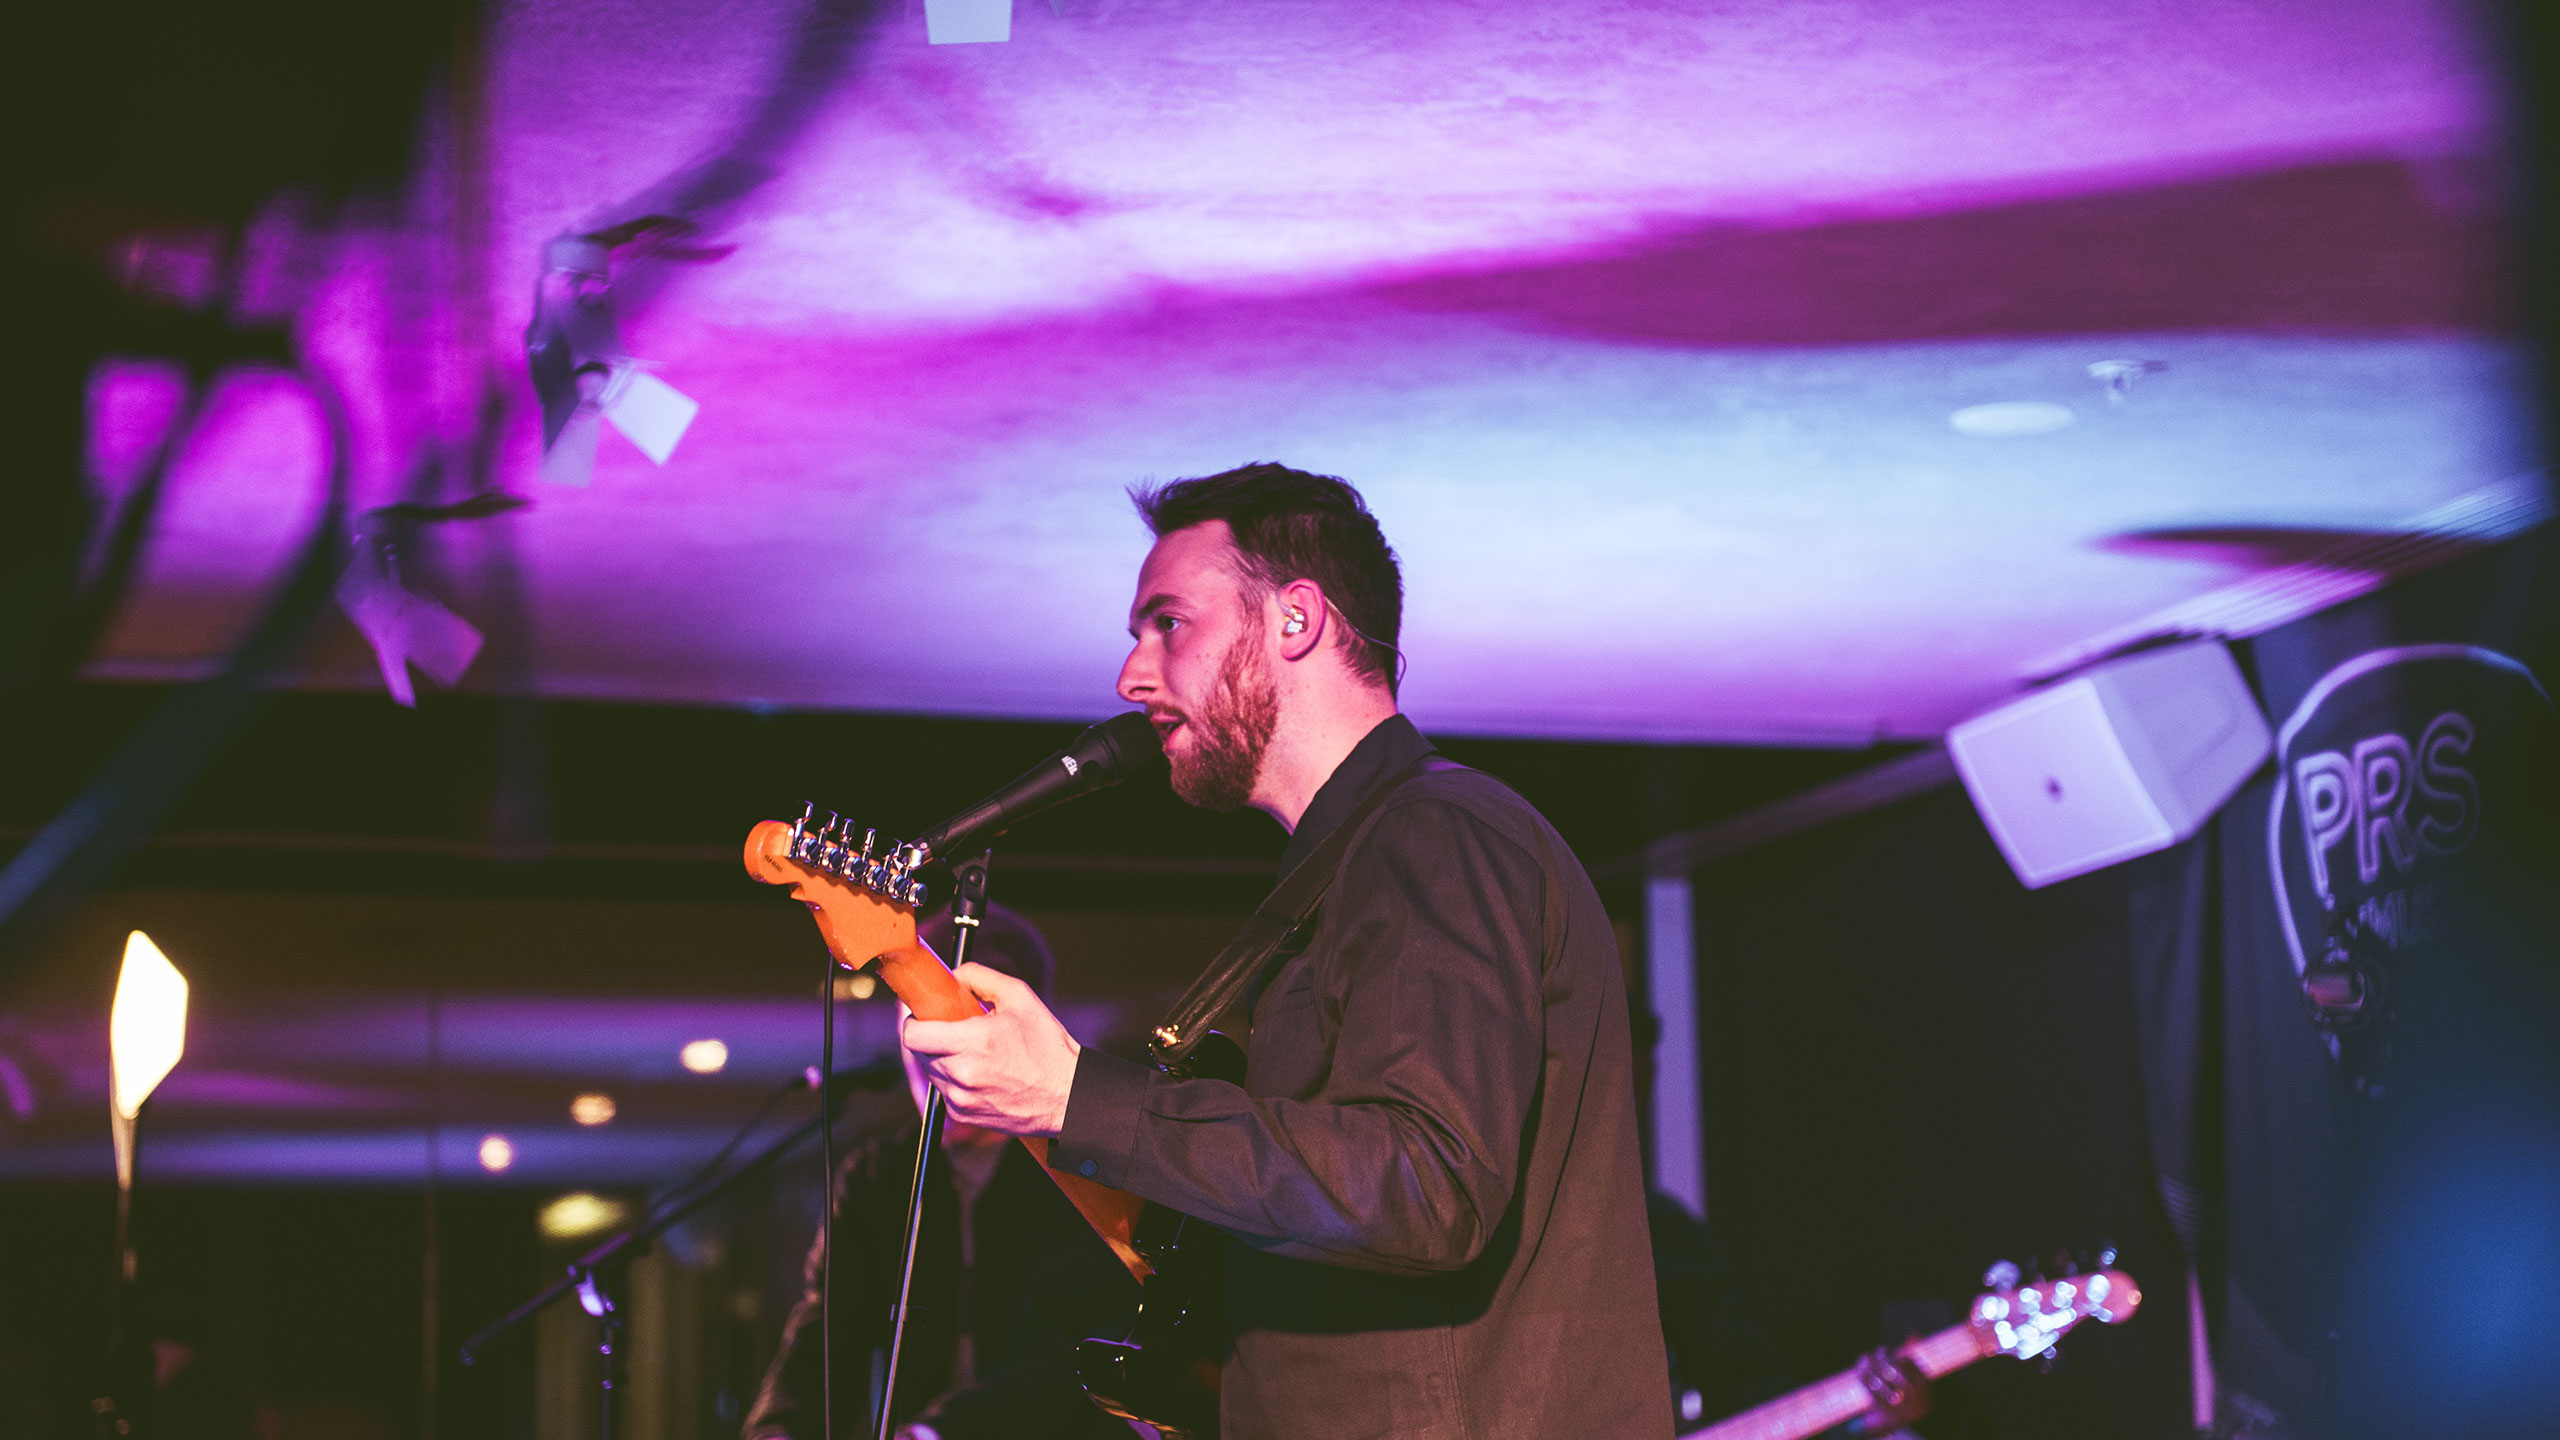 A shot from the side of Honne's Andy Clutterbuck singing and playing guitar on stage at PRS Presents